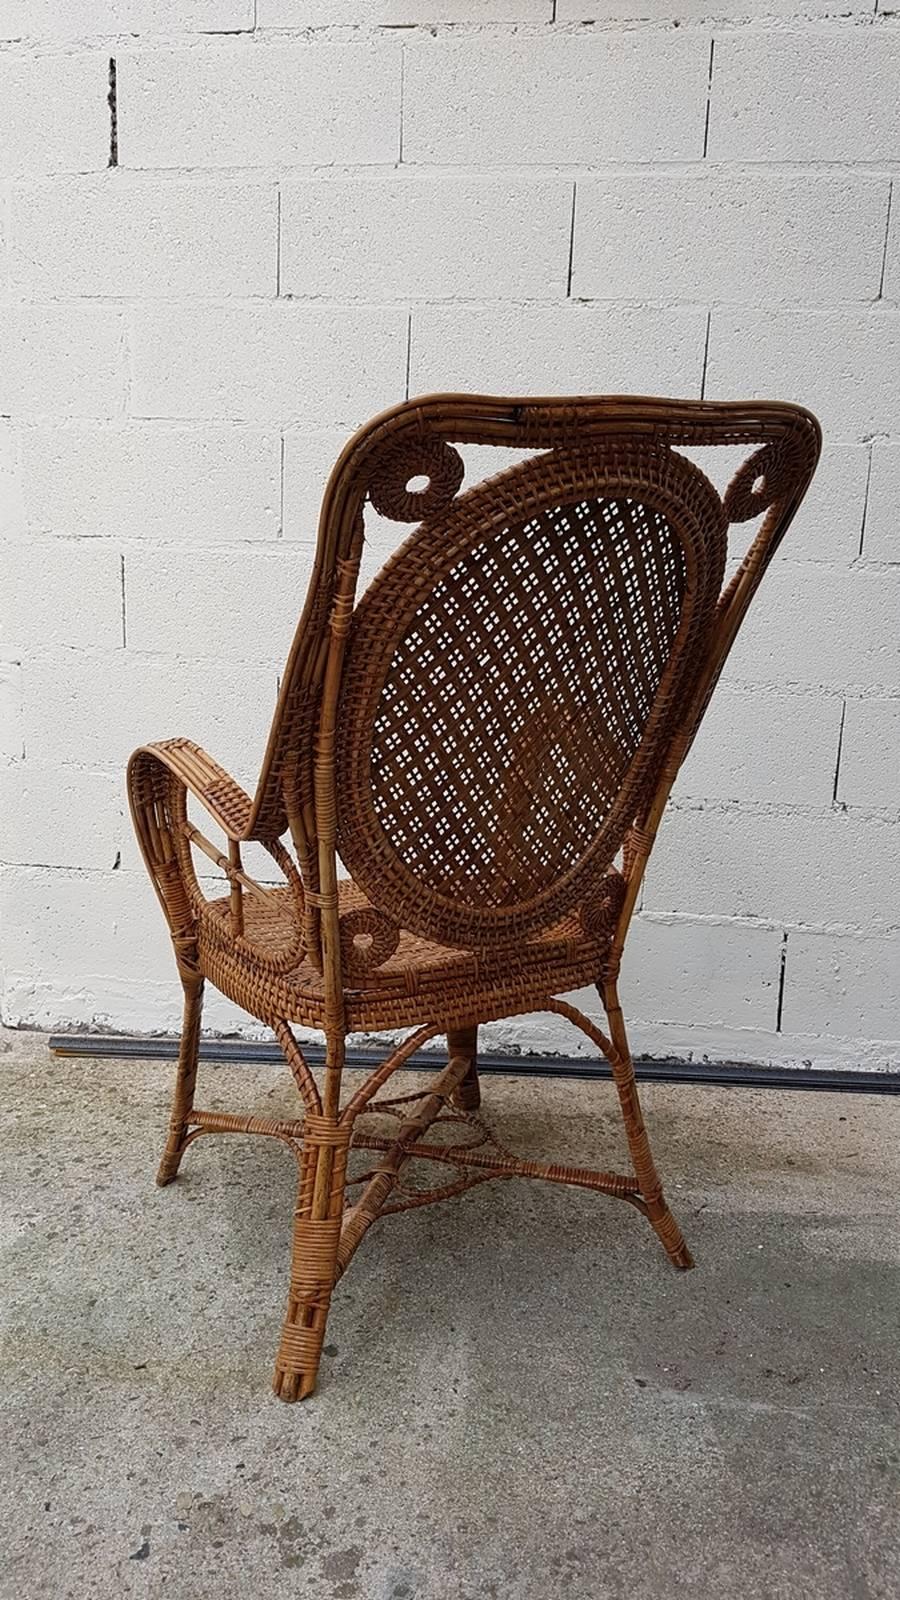 French Perret & Vibert, Rattan Armchair, End of the 19th Century